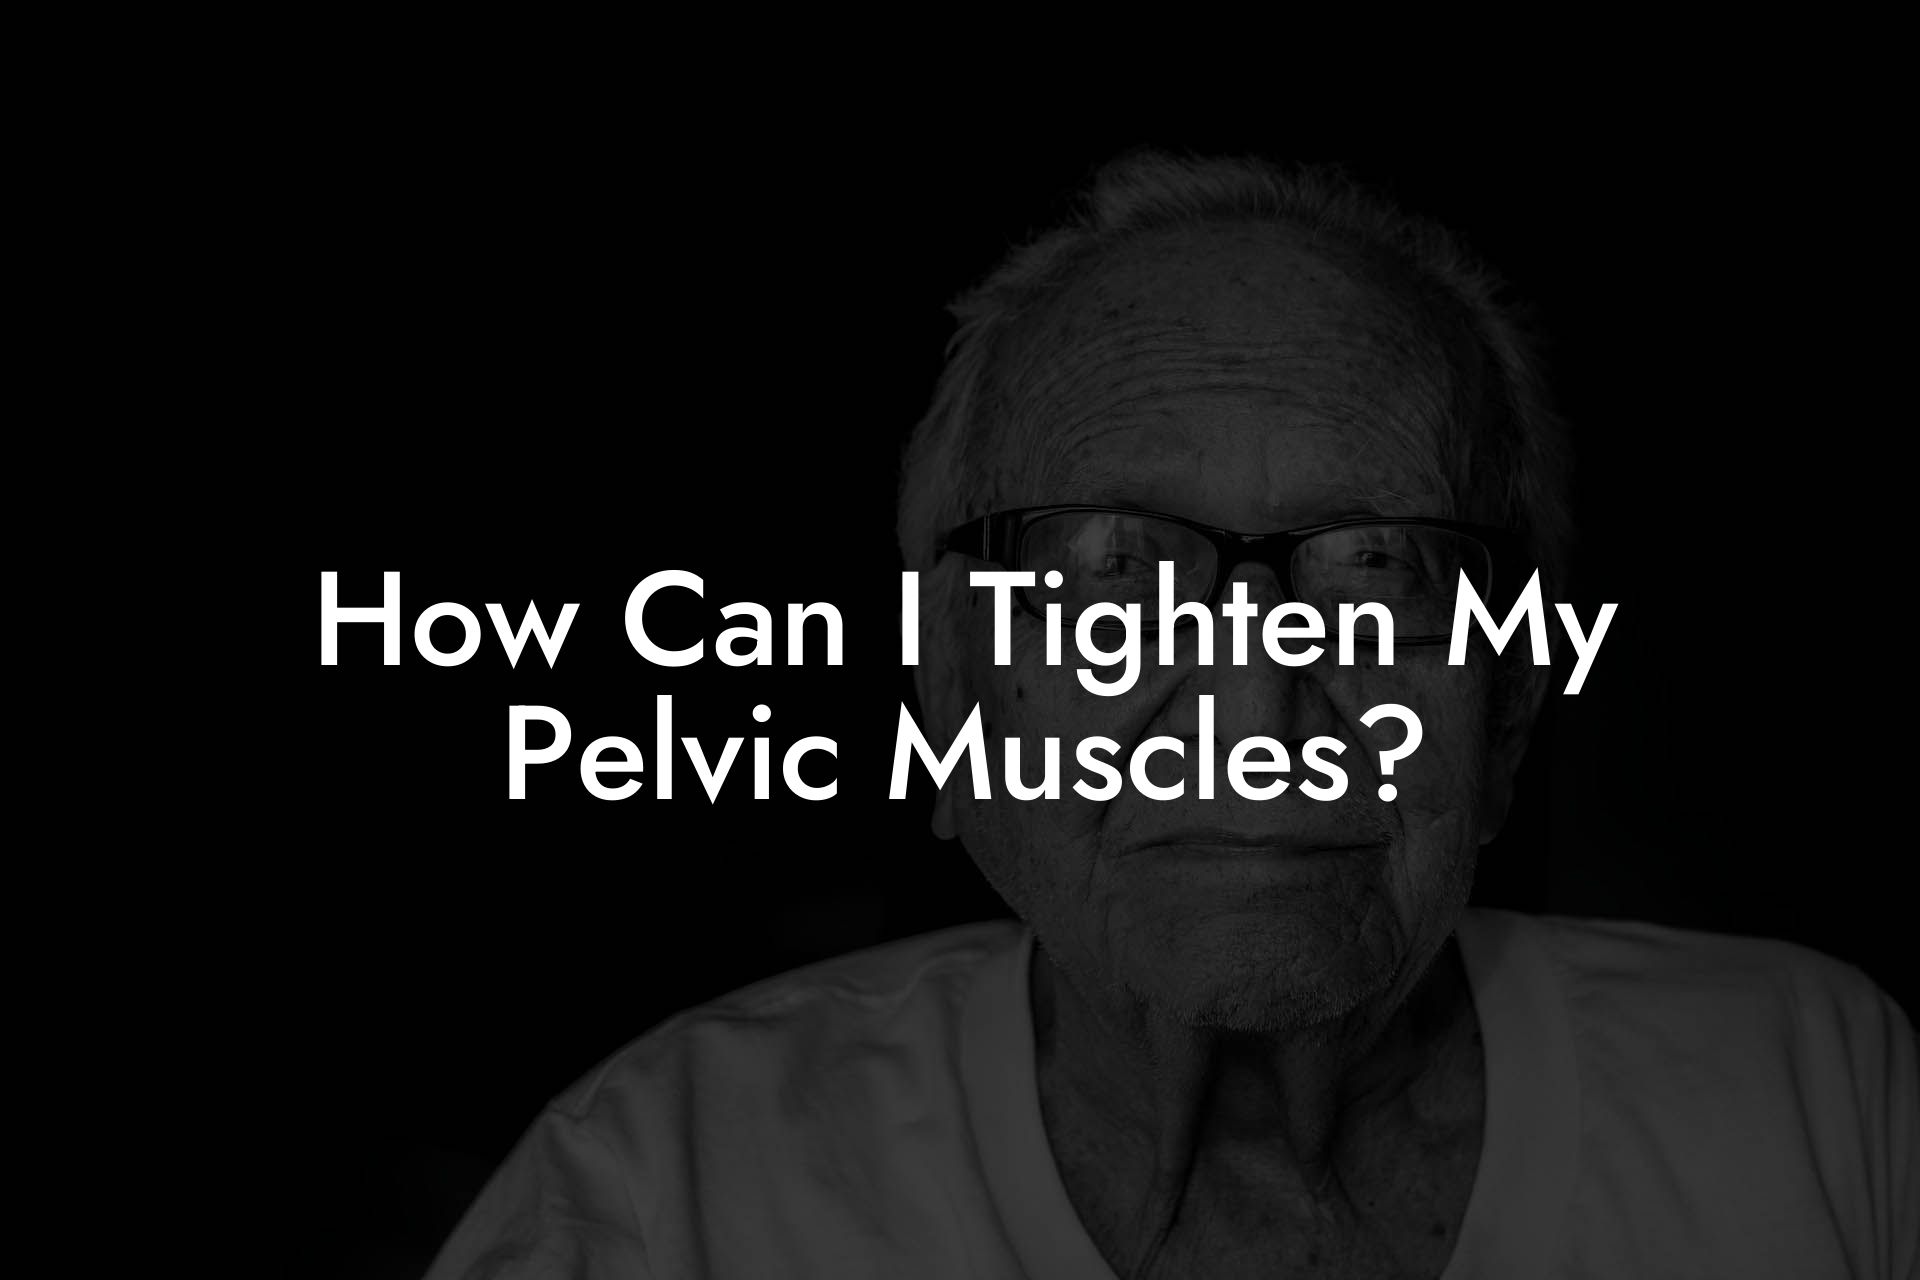 How Can I Tighten My Pelvic Muscles?